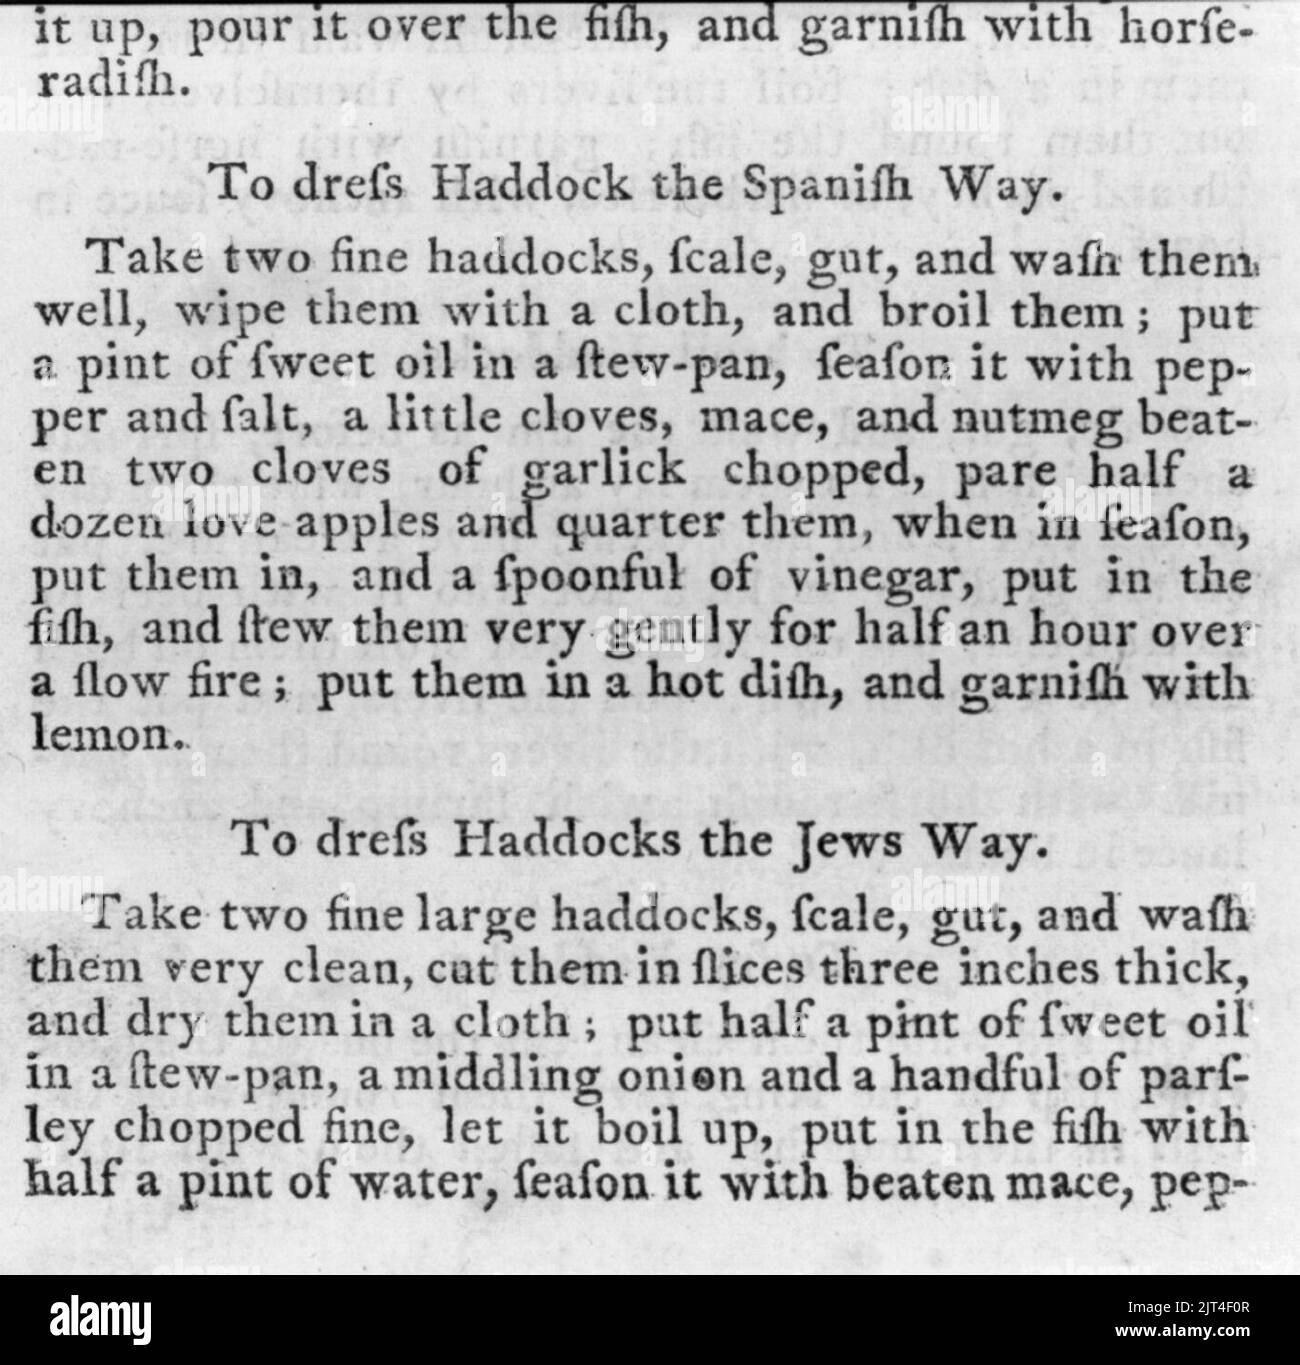 Two recipes for haddock from the first American edition of Richard Briggs' The New Art of Cookery (1792). ''To dress Haddock the Spanish Way,'' prepared with the ''love apple'' or tomato, and Stock Photo